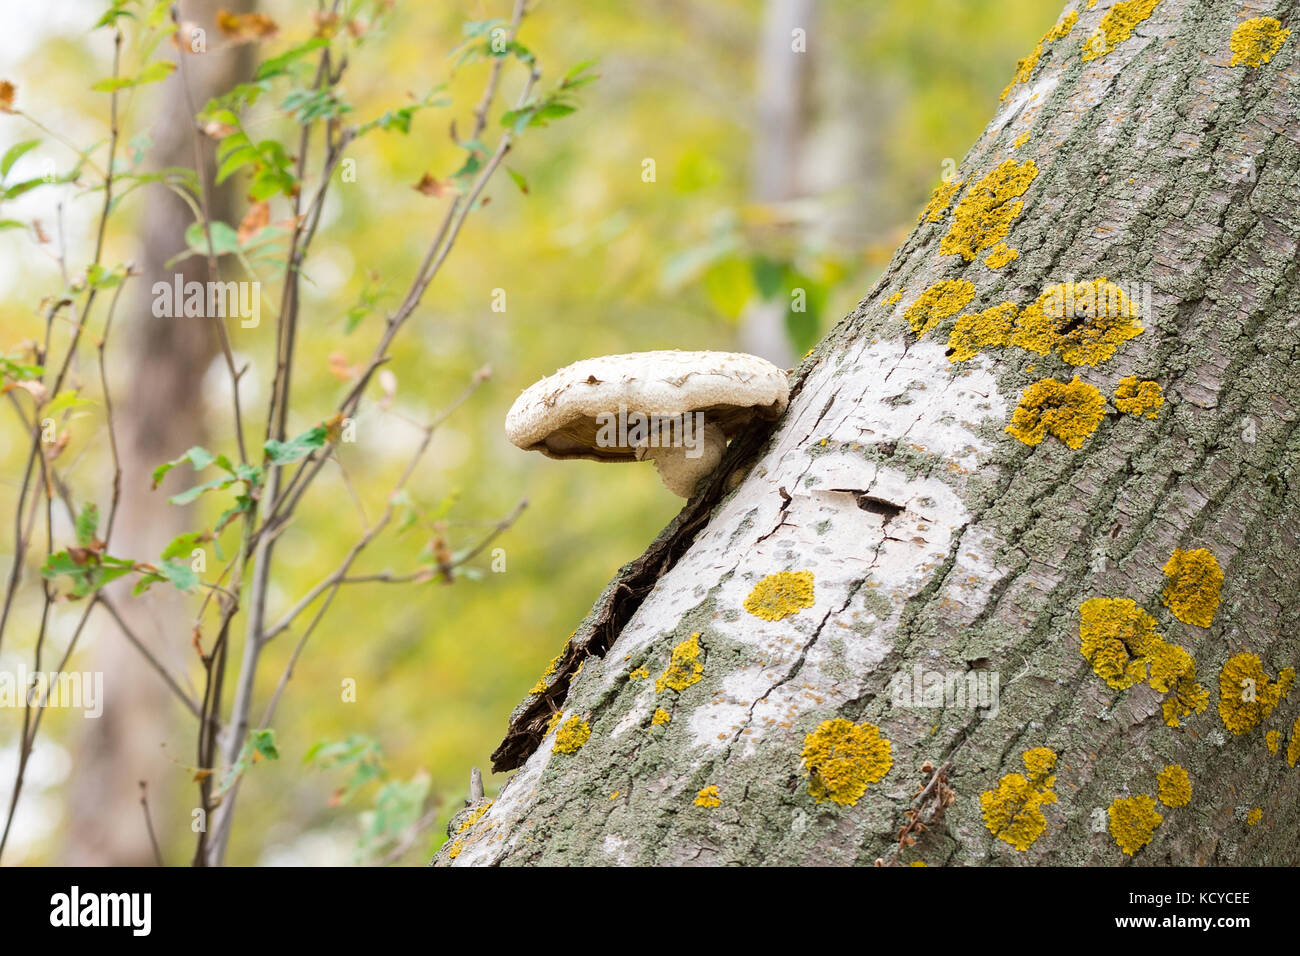 Fungus on a broken tree, forest, nature Stock Photo